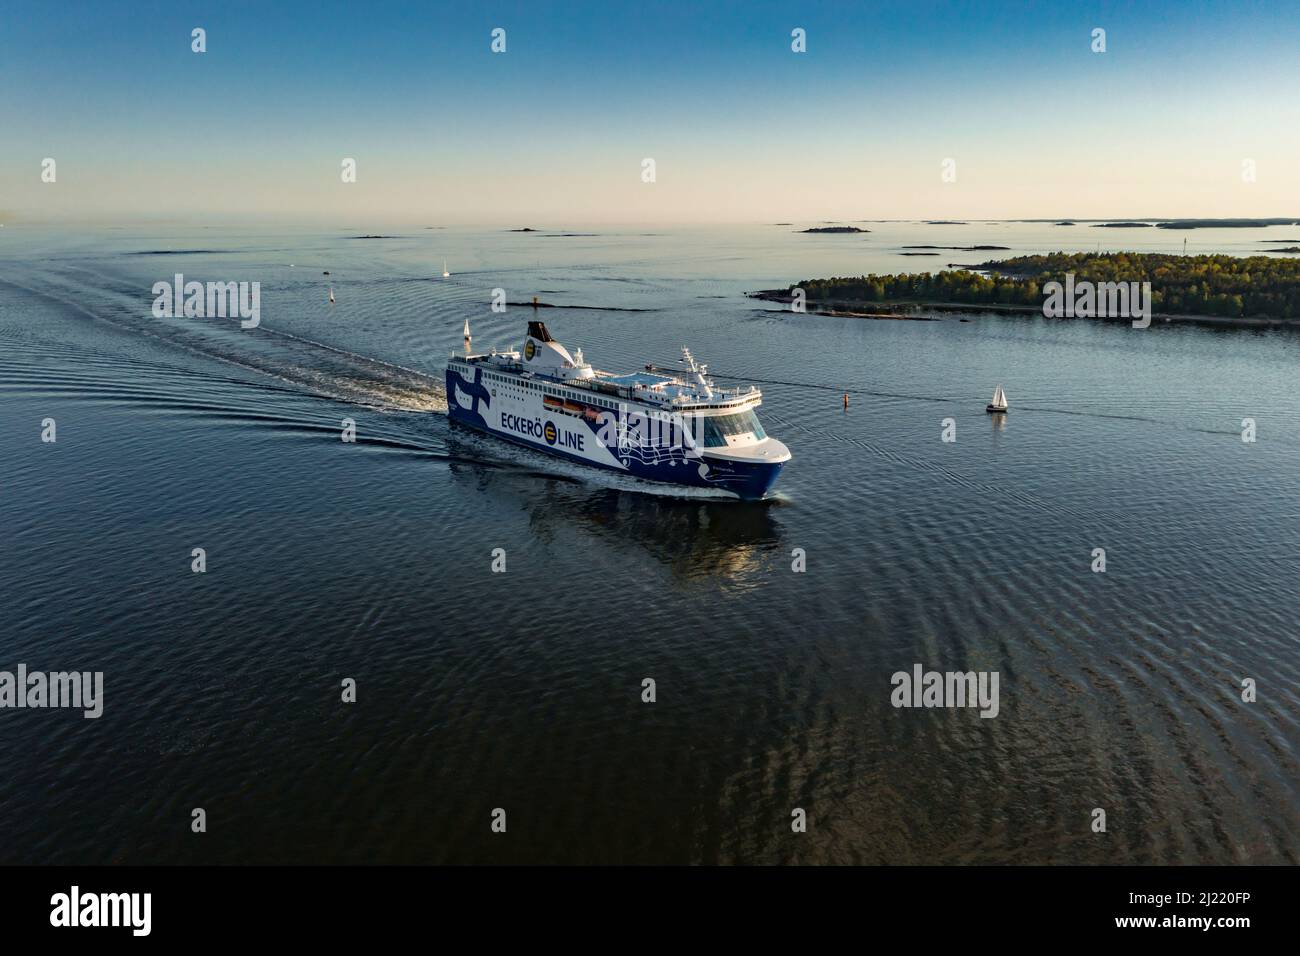 Aerial view following the Eckero line cruiseliner ship, moving towards the Helsinki, Finland Stock Photo